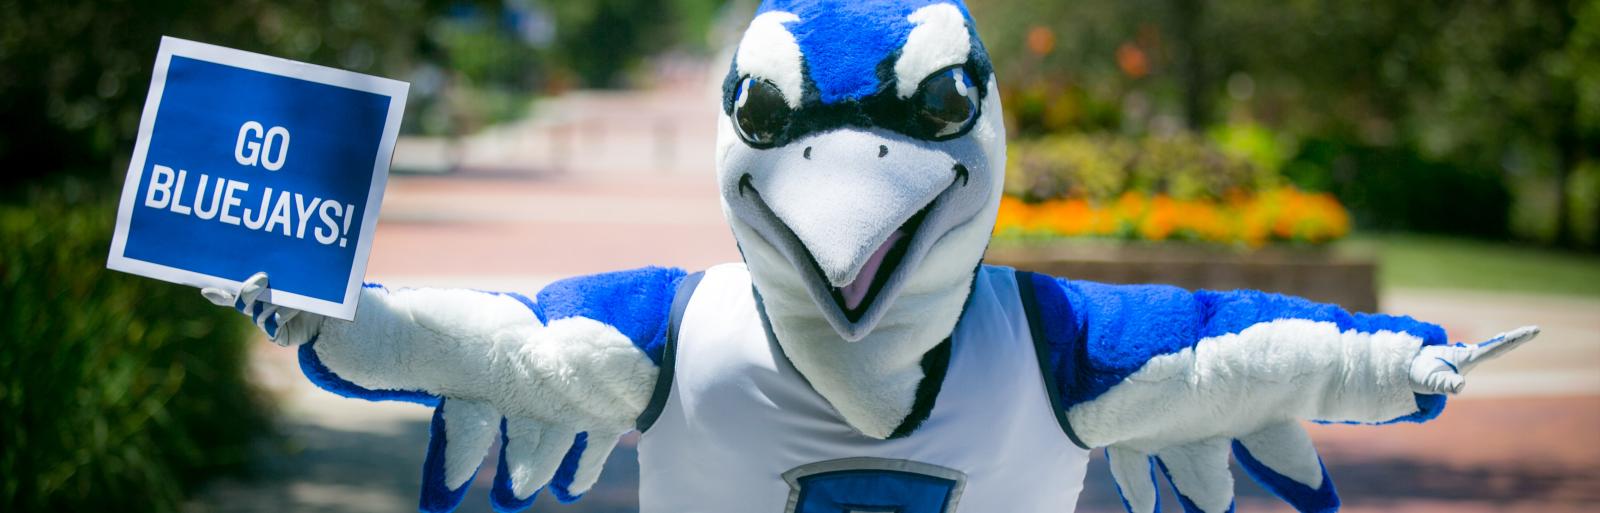 Mascot Billy Bluejay from Creighton University holding a Go Bluejays sign